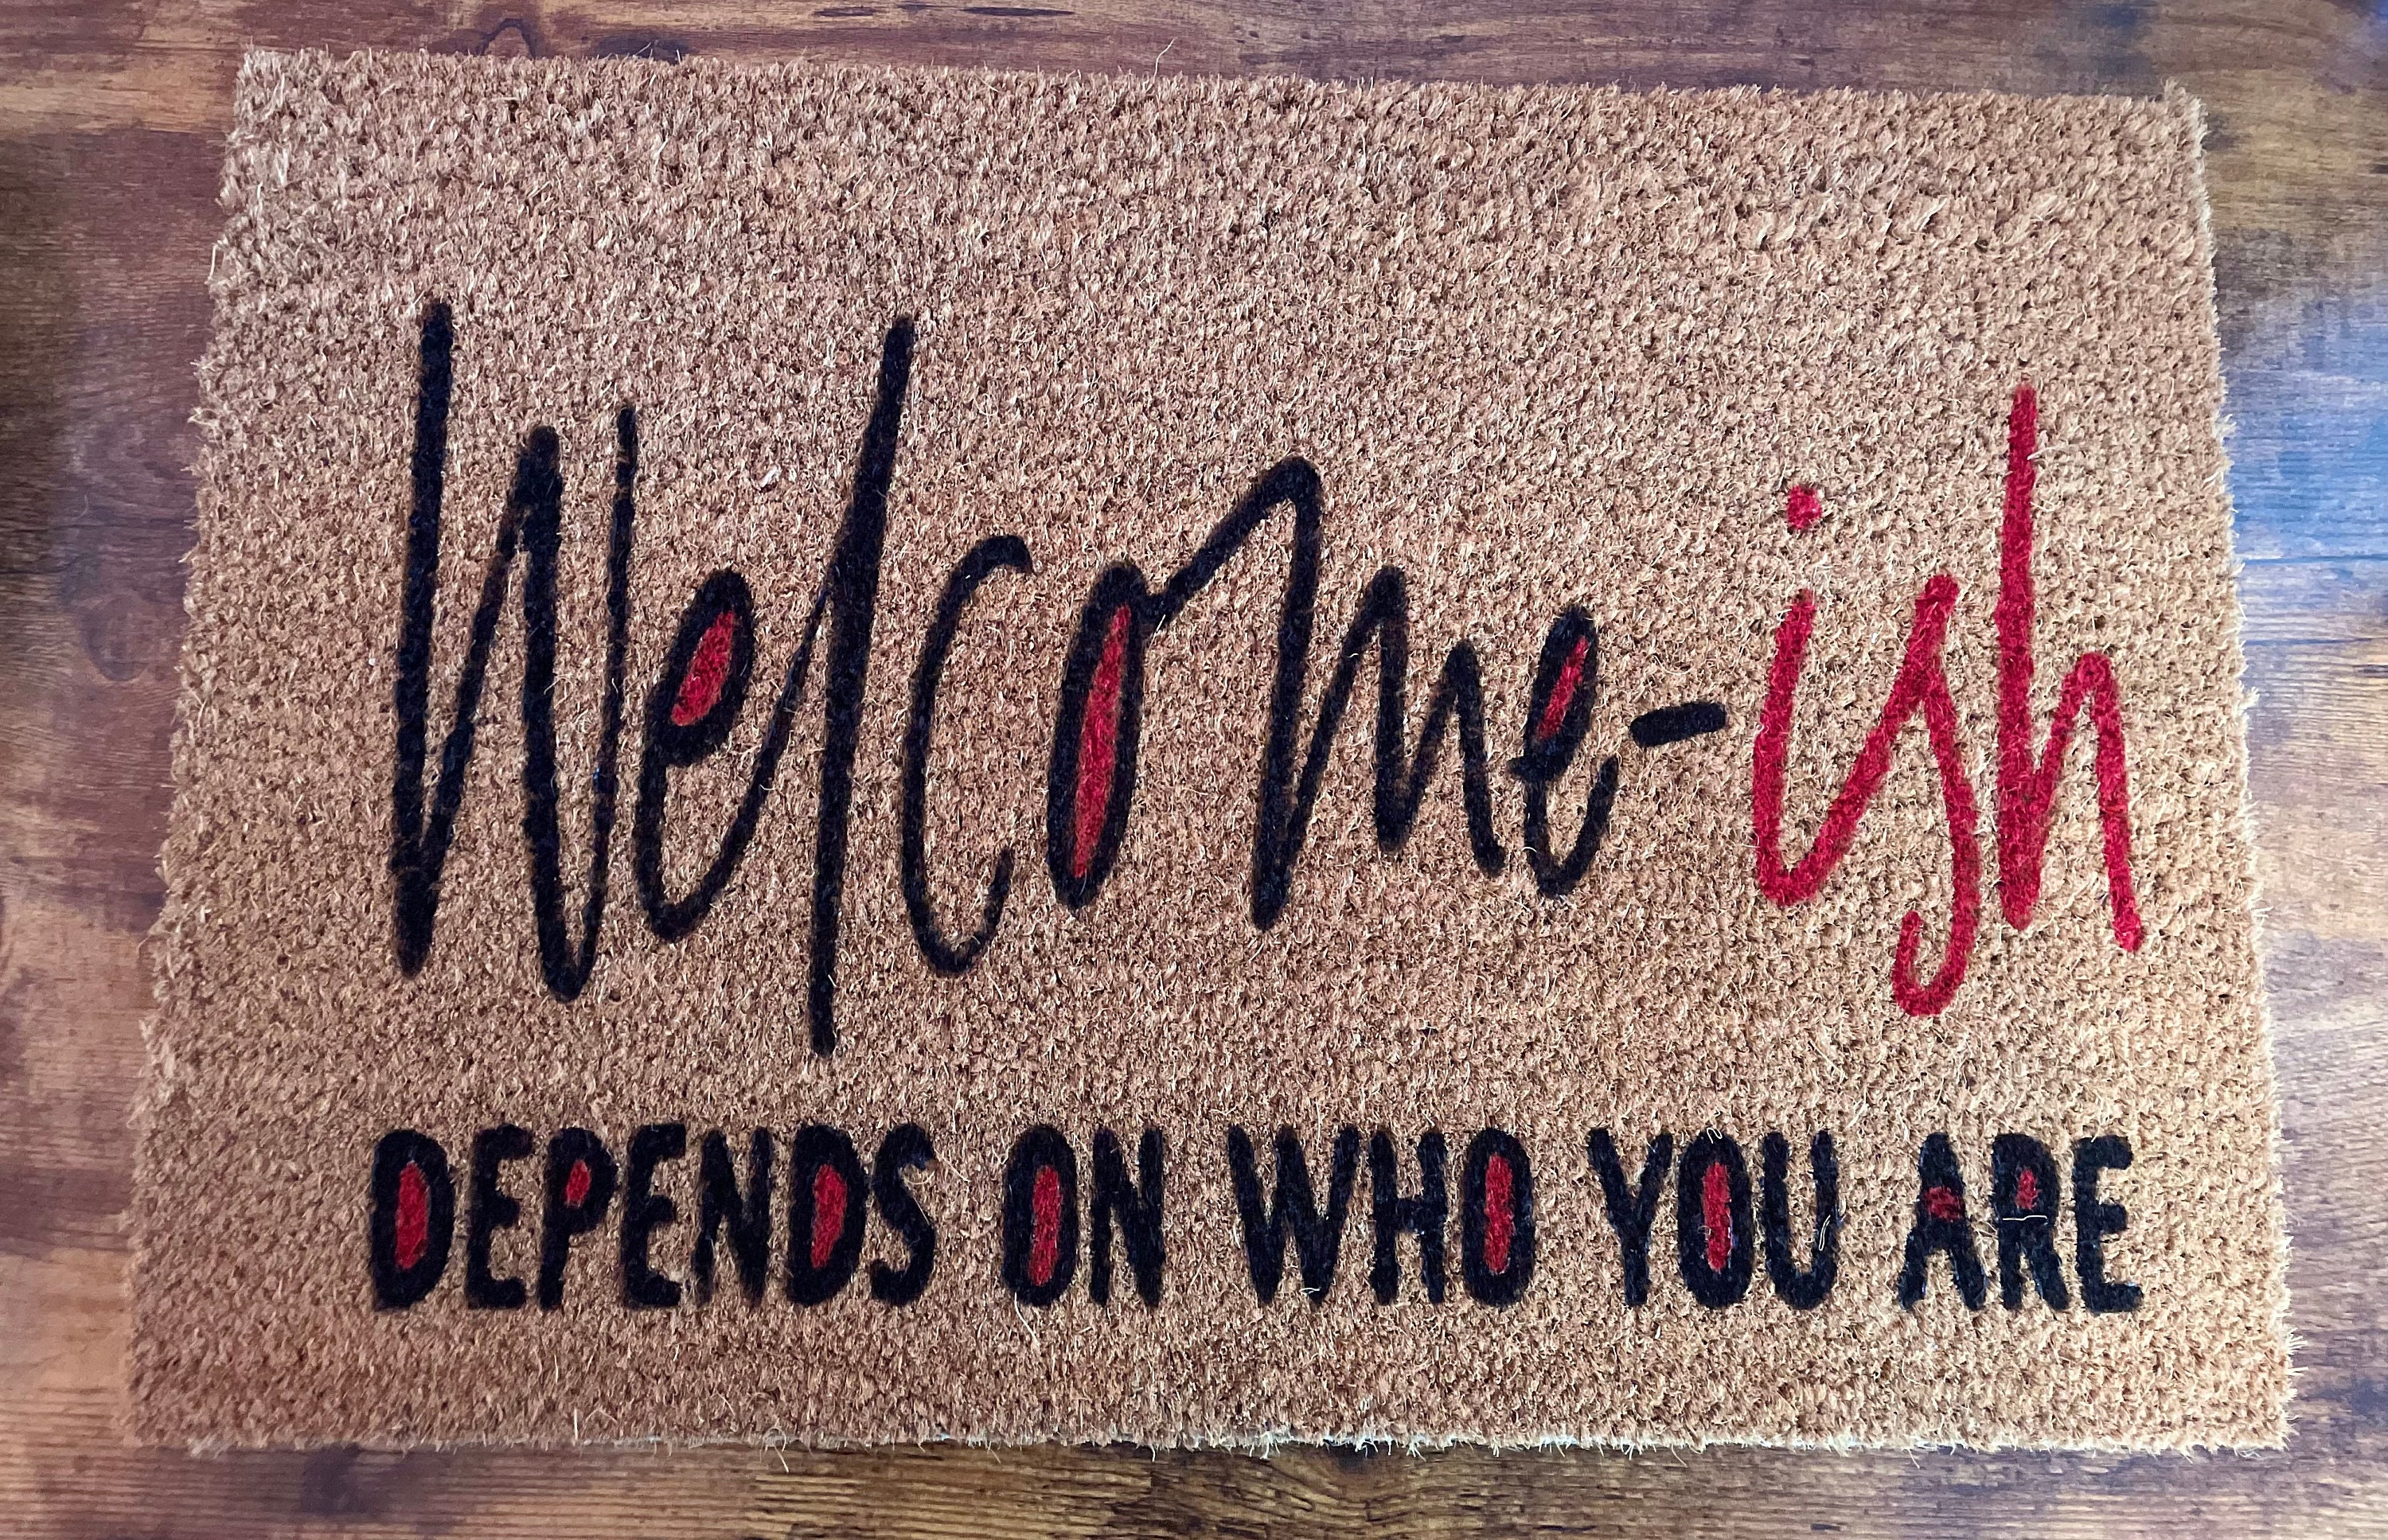 Welcome-ish Depends Who You Are Doormat - Unwelcome mat, quarantine gift,  new house homeowner closing gift - A Custom Shop